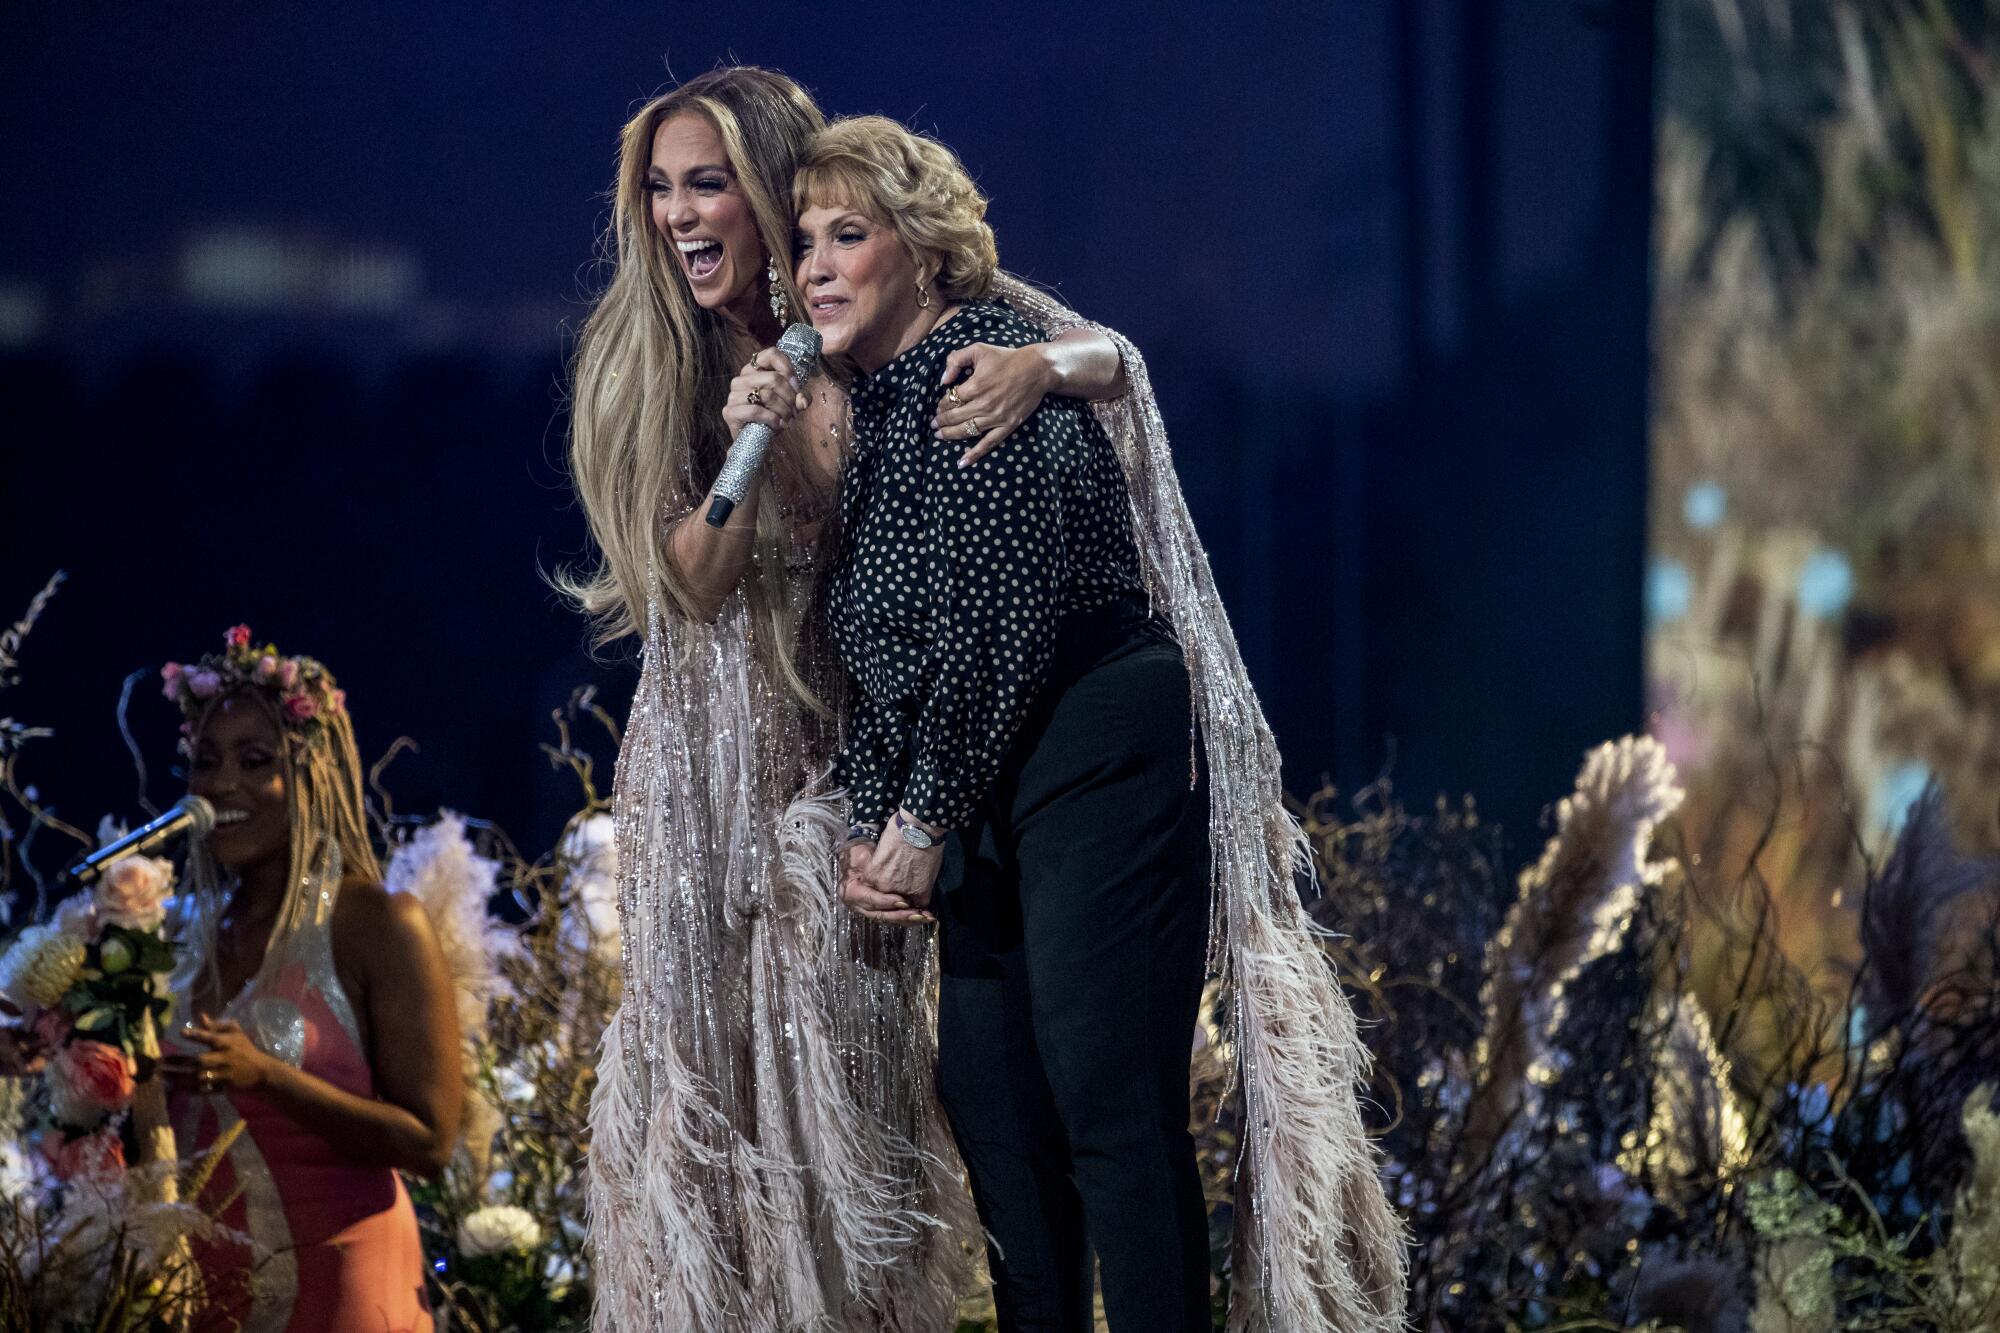  Jennifer Lopez introduces her mom, Guadalupe Rodriguez, onstage